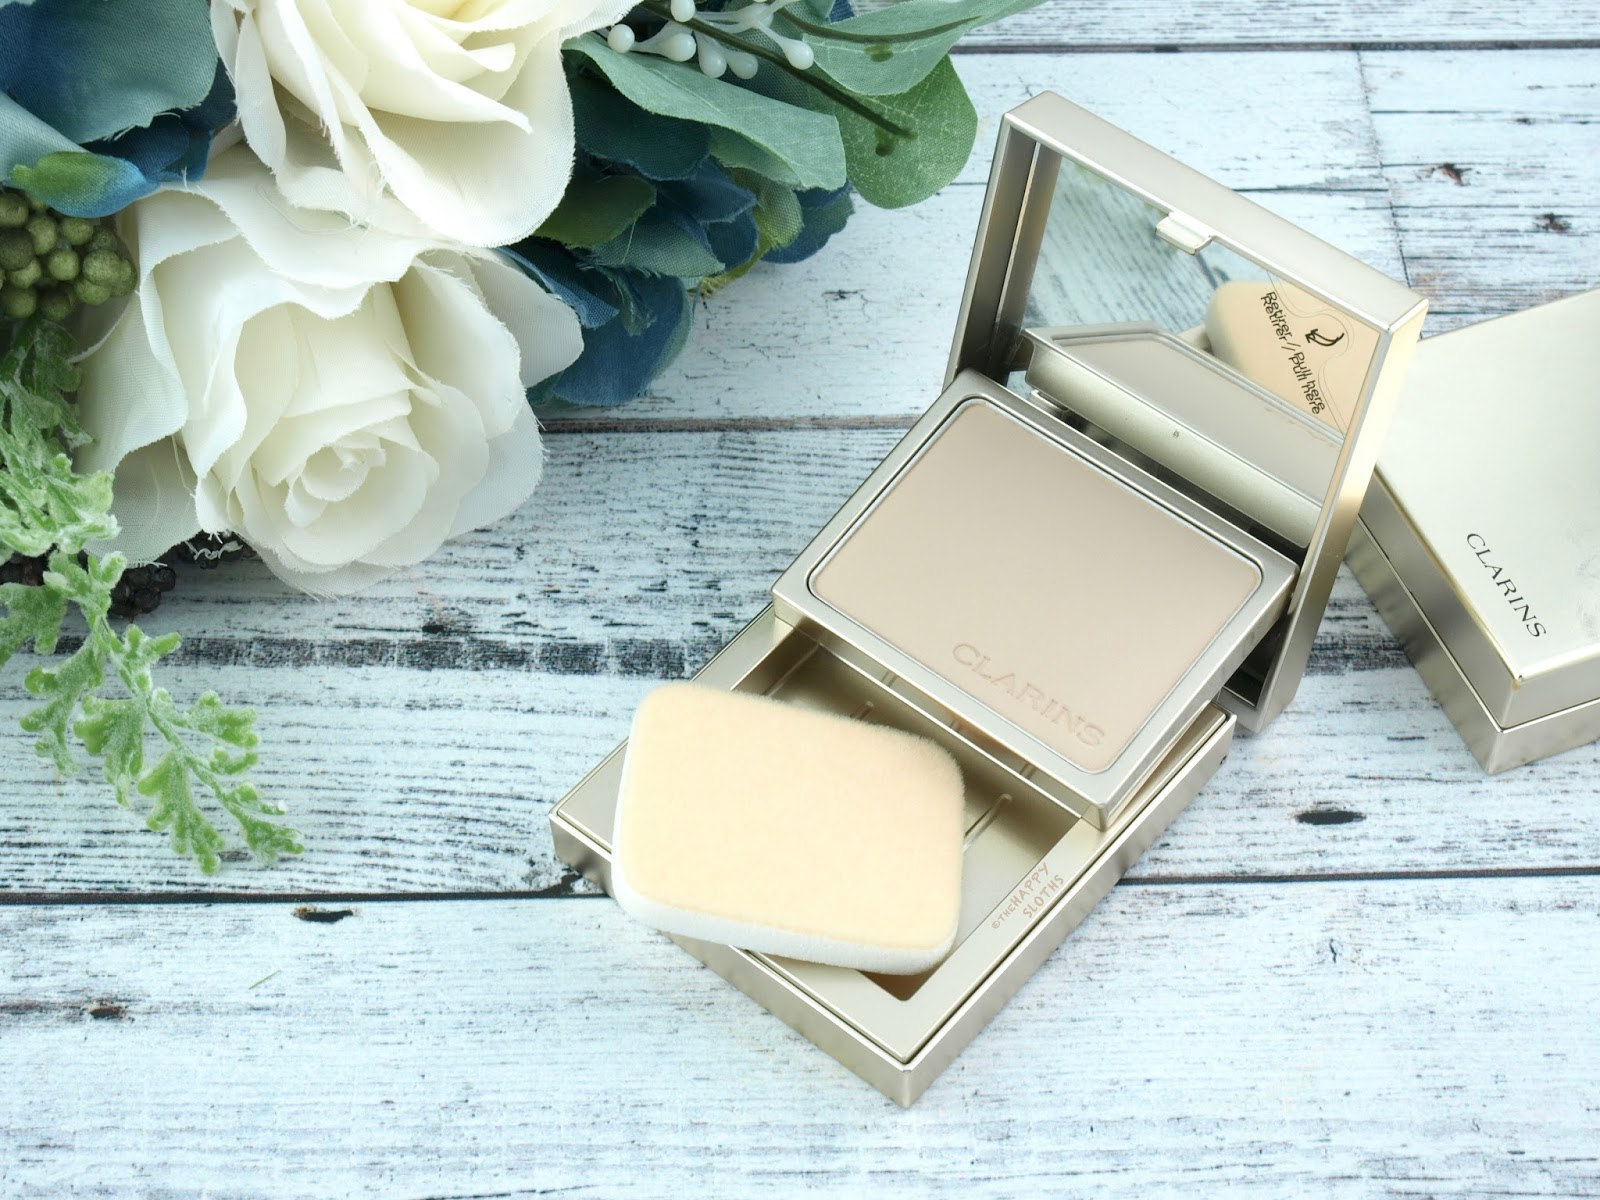 Clarins Everlasting+ Compact Foundation: Review and Swatches